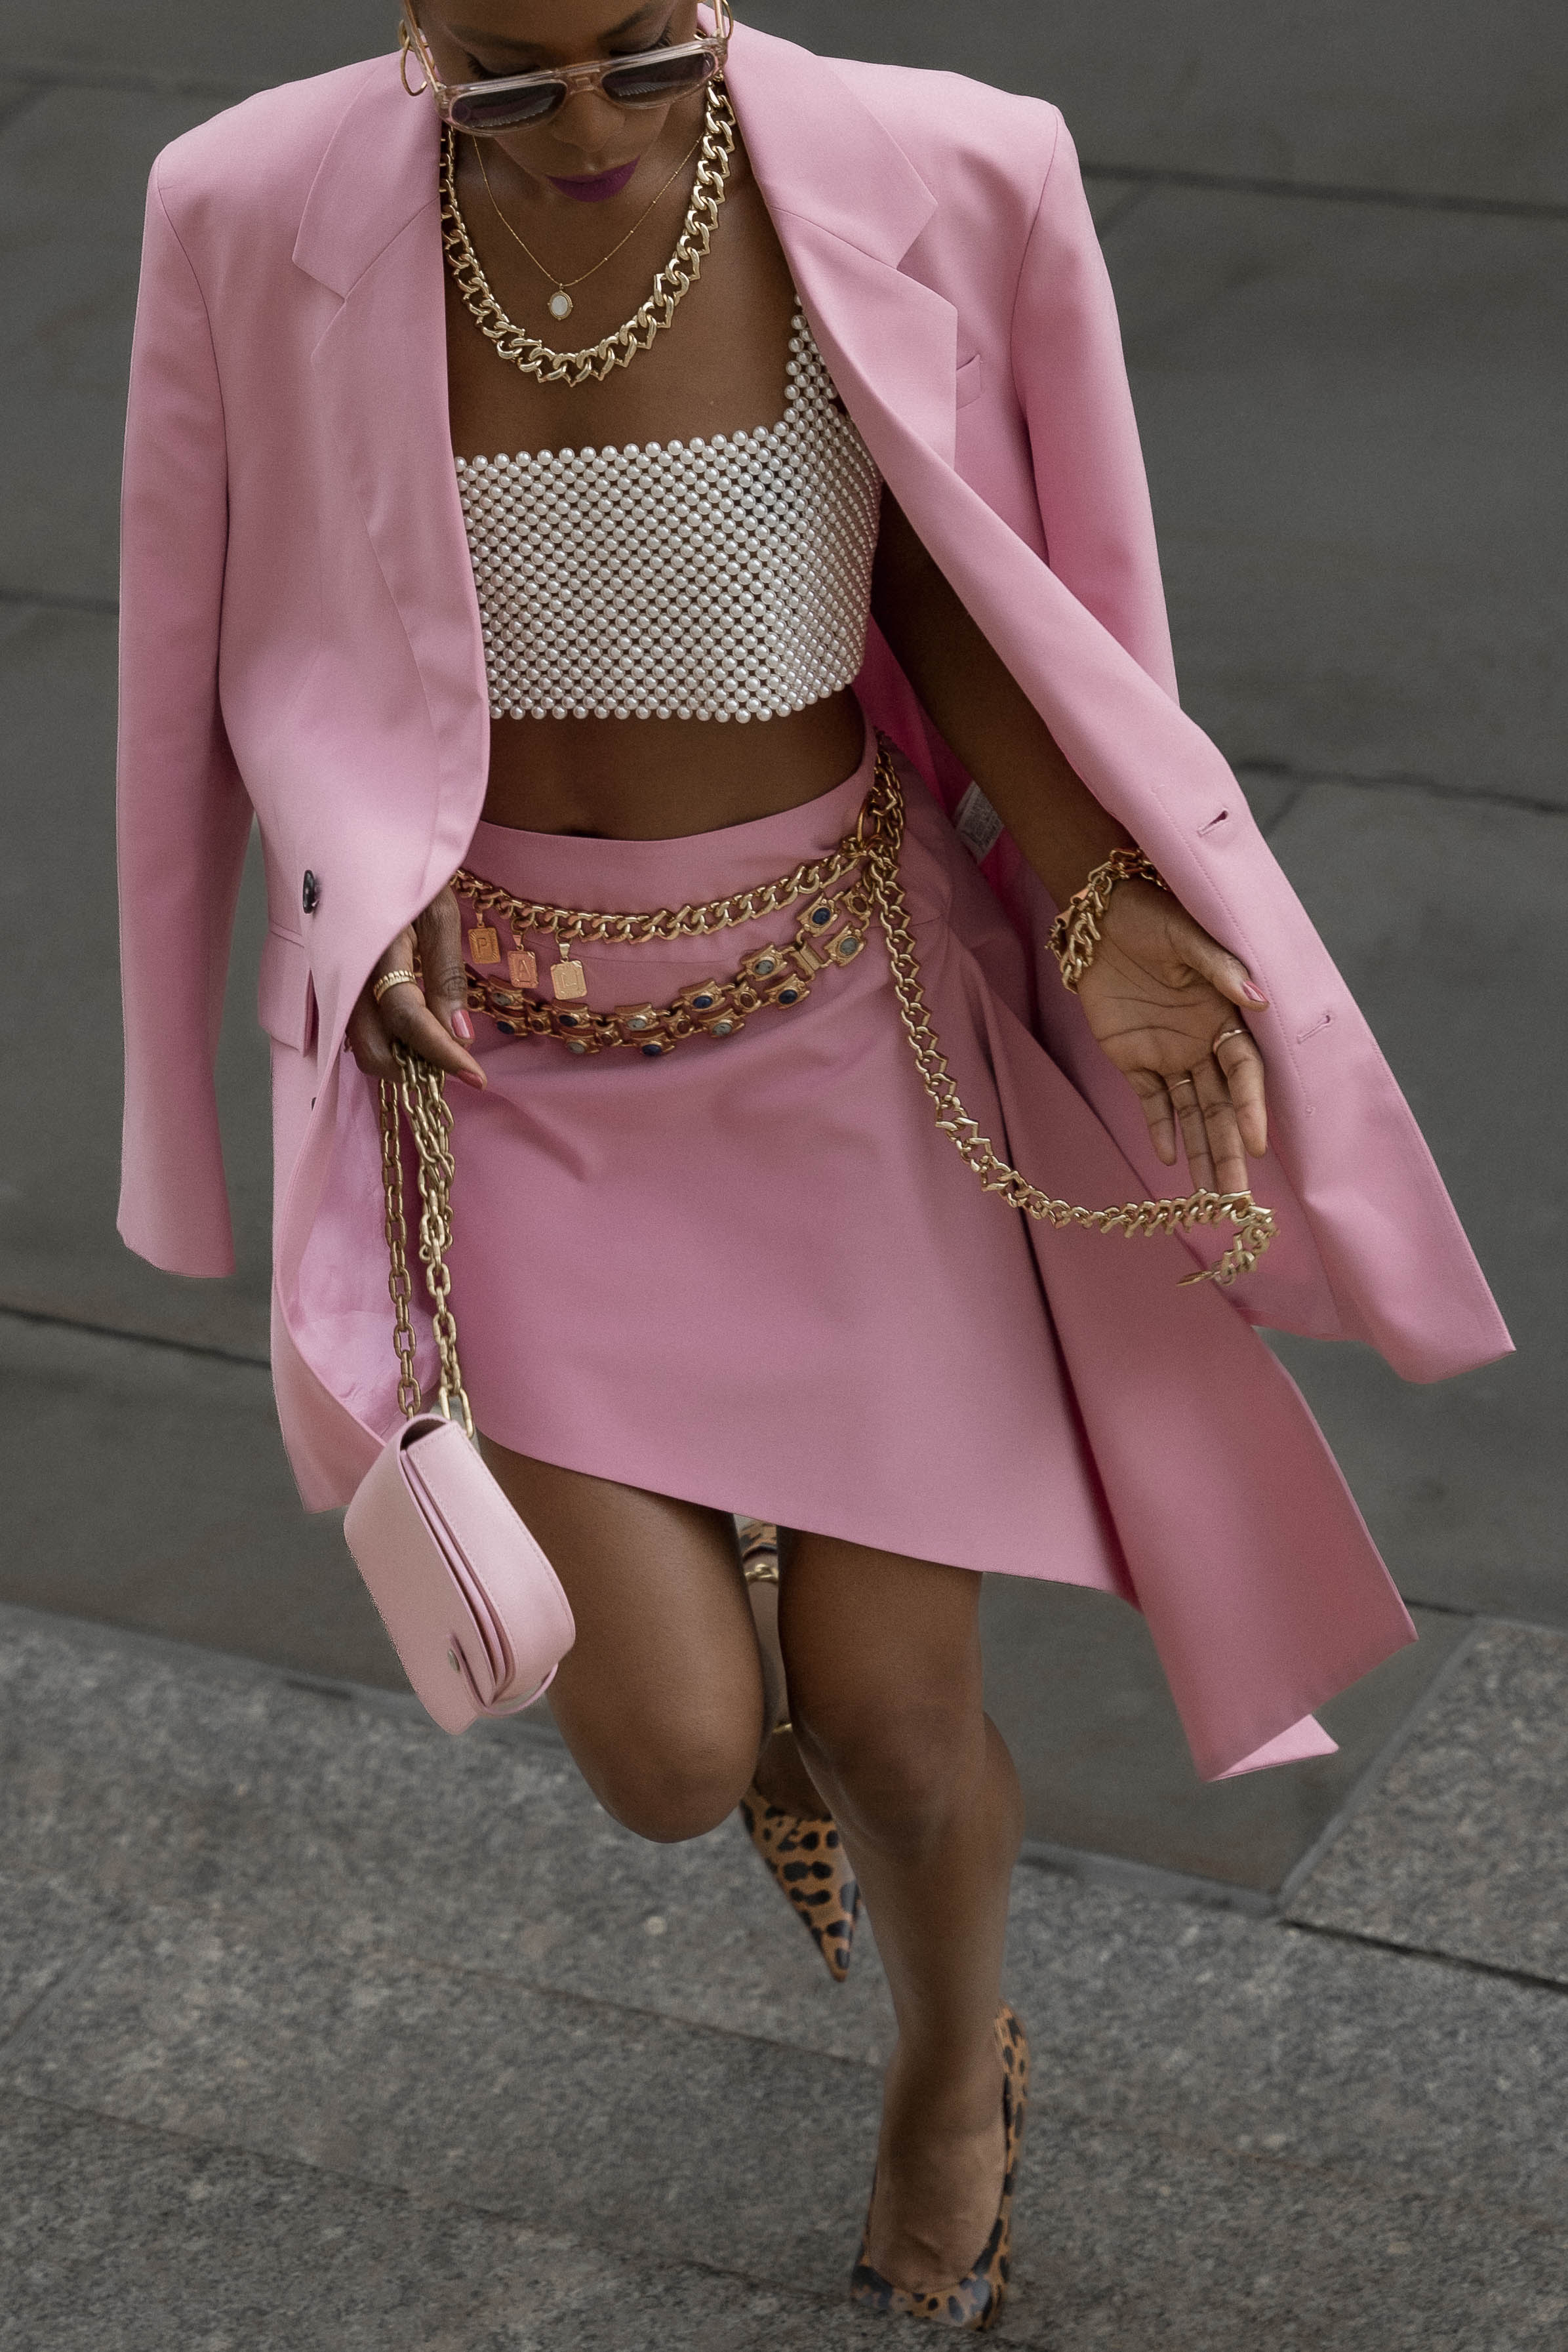 Photo of a woman on the street wearing pink skirt suit styled with pearl top, gold statement chain belt and jewelry